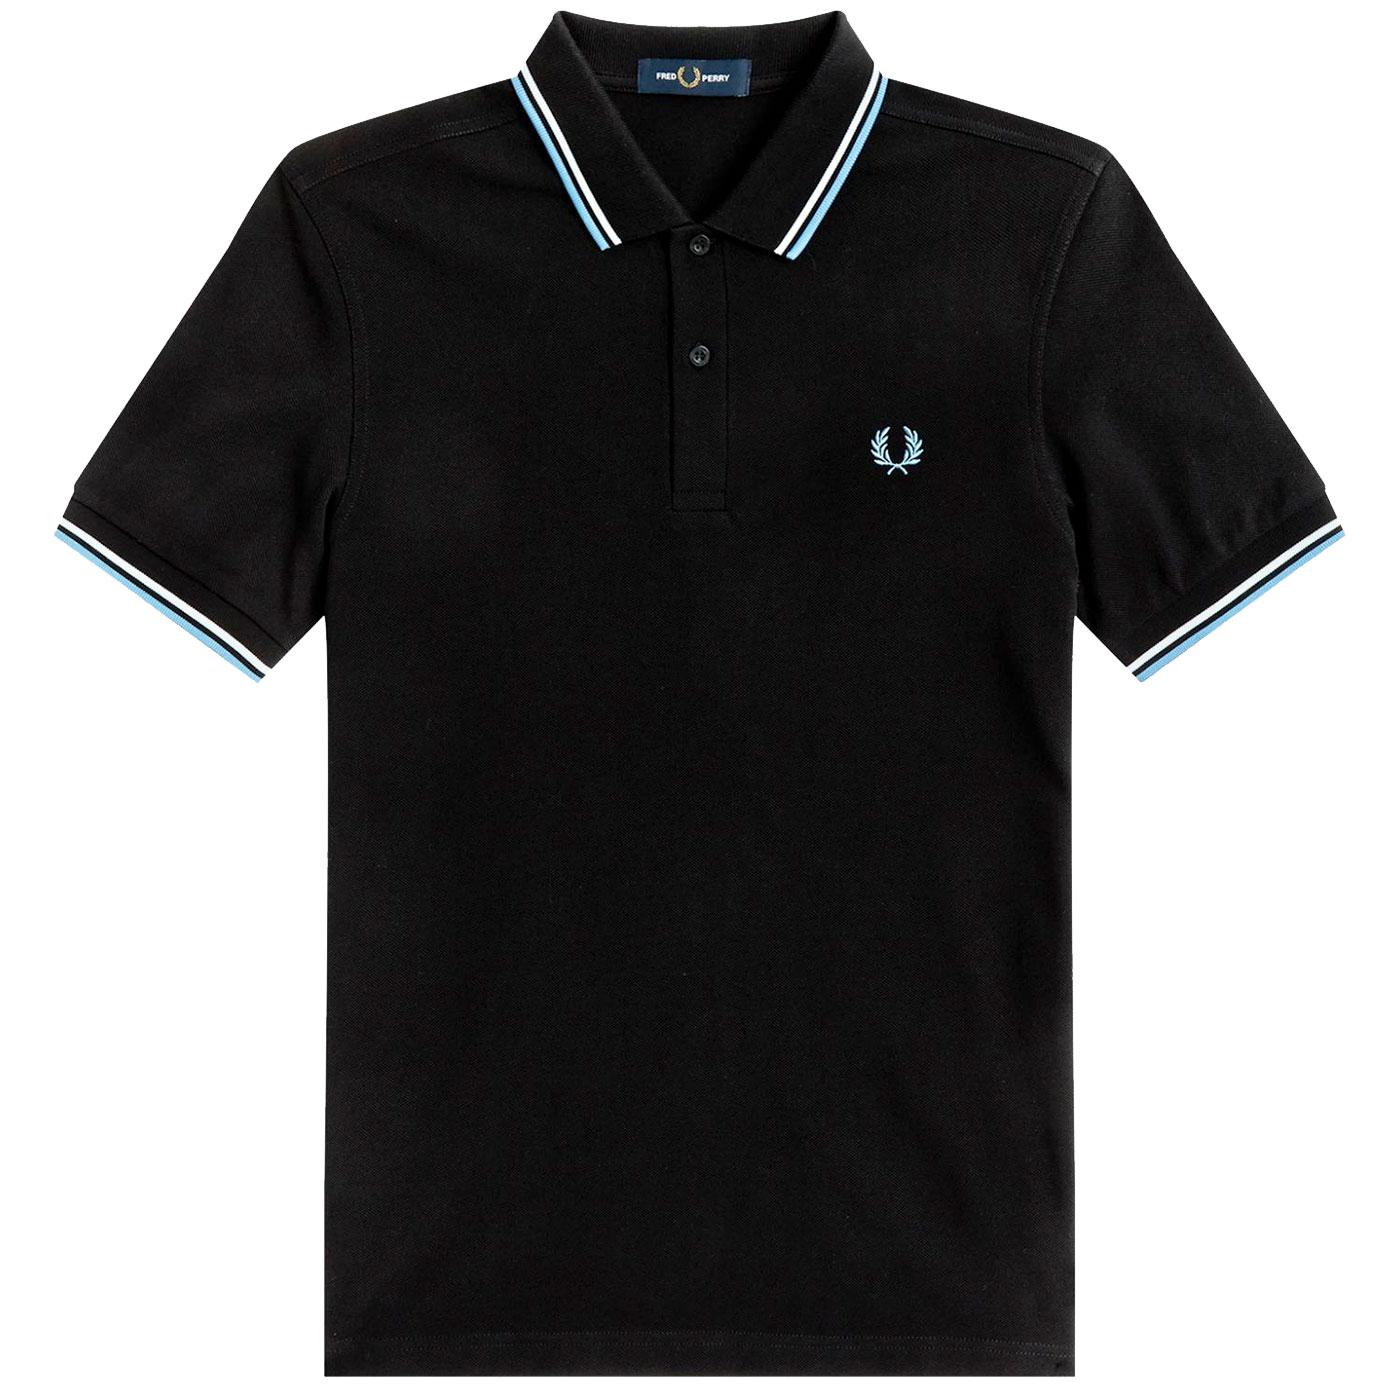 FRED PERRY M3600 Twin Tipped Mod Polo Shirt (BWS)